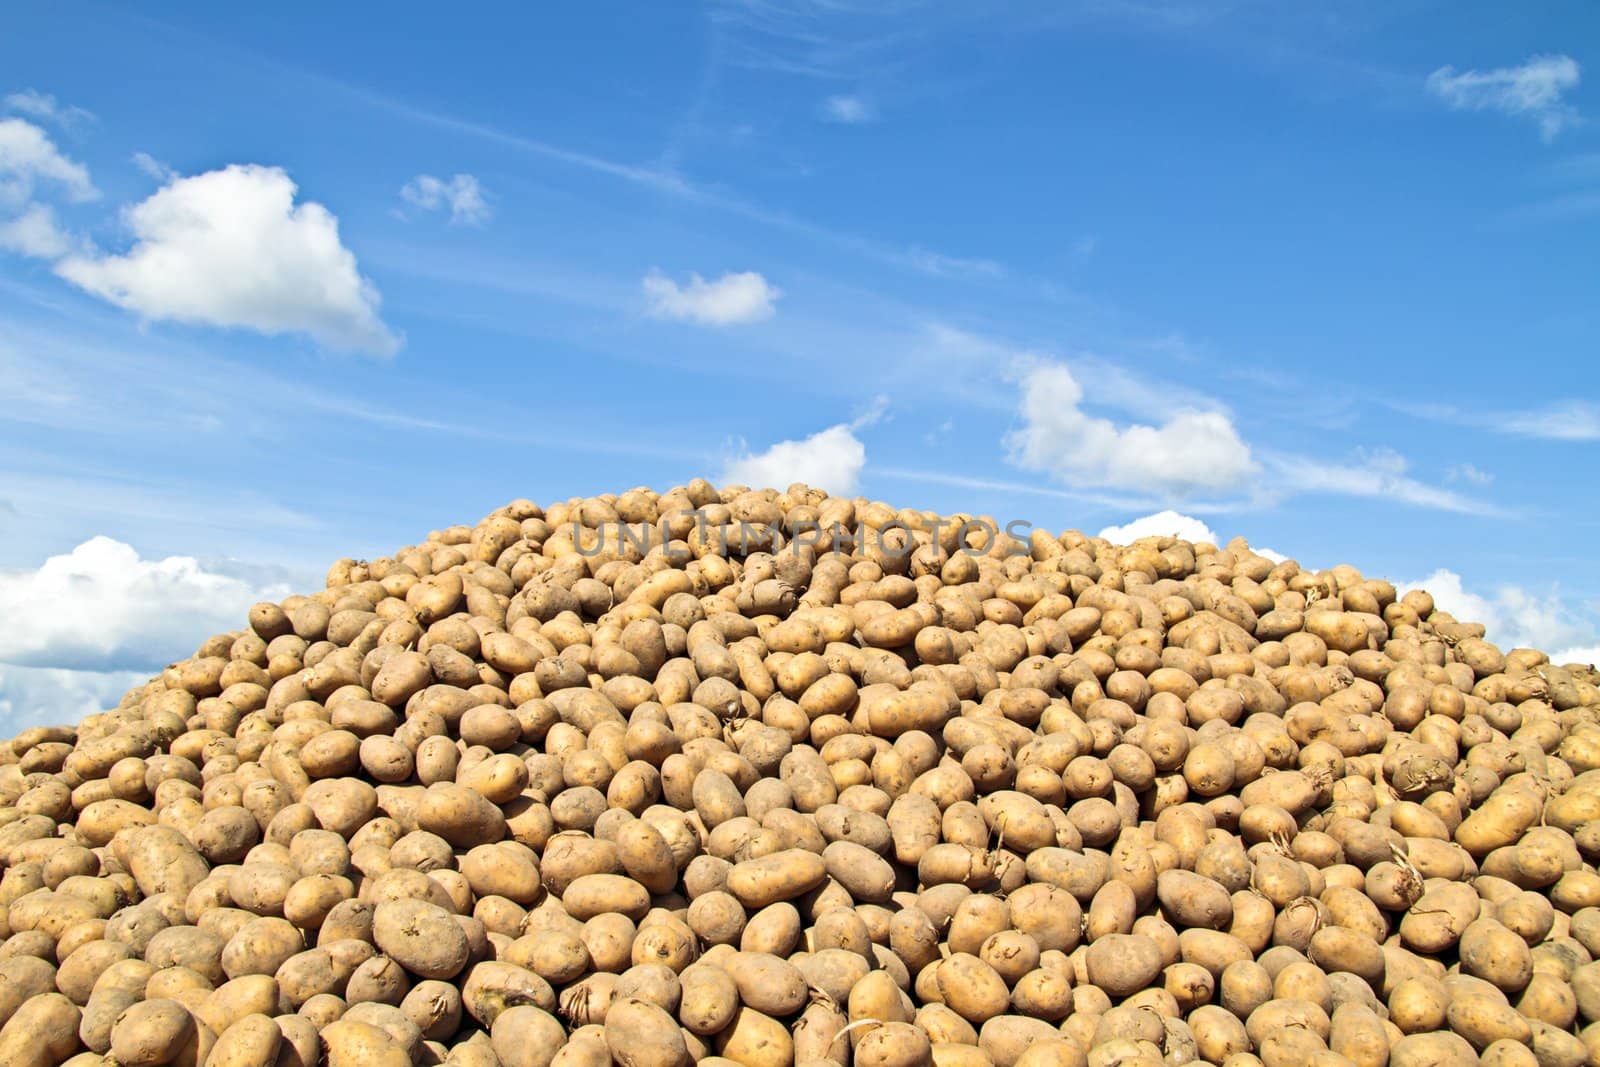 Pile of potatoes against a blue sky